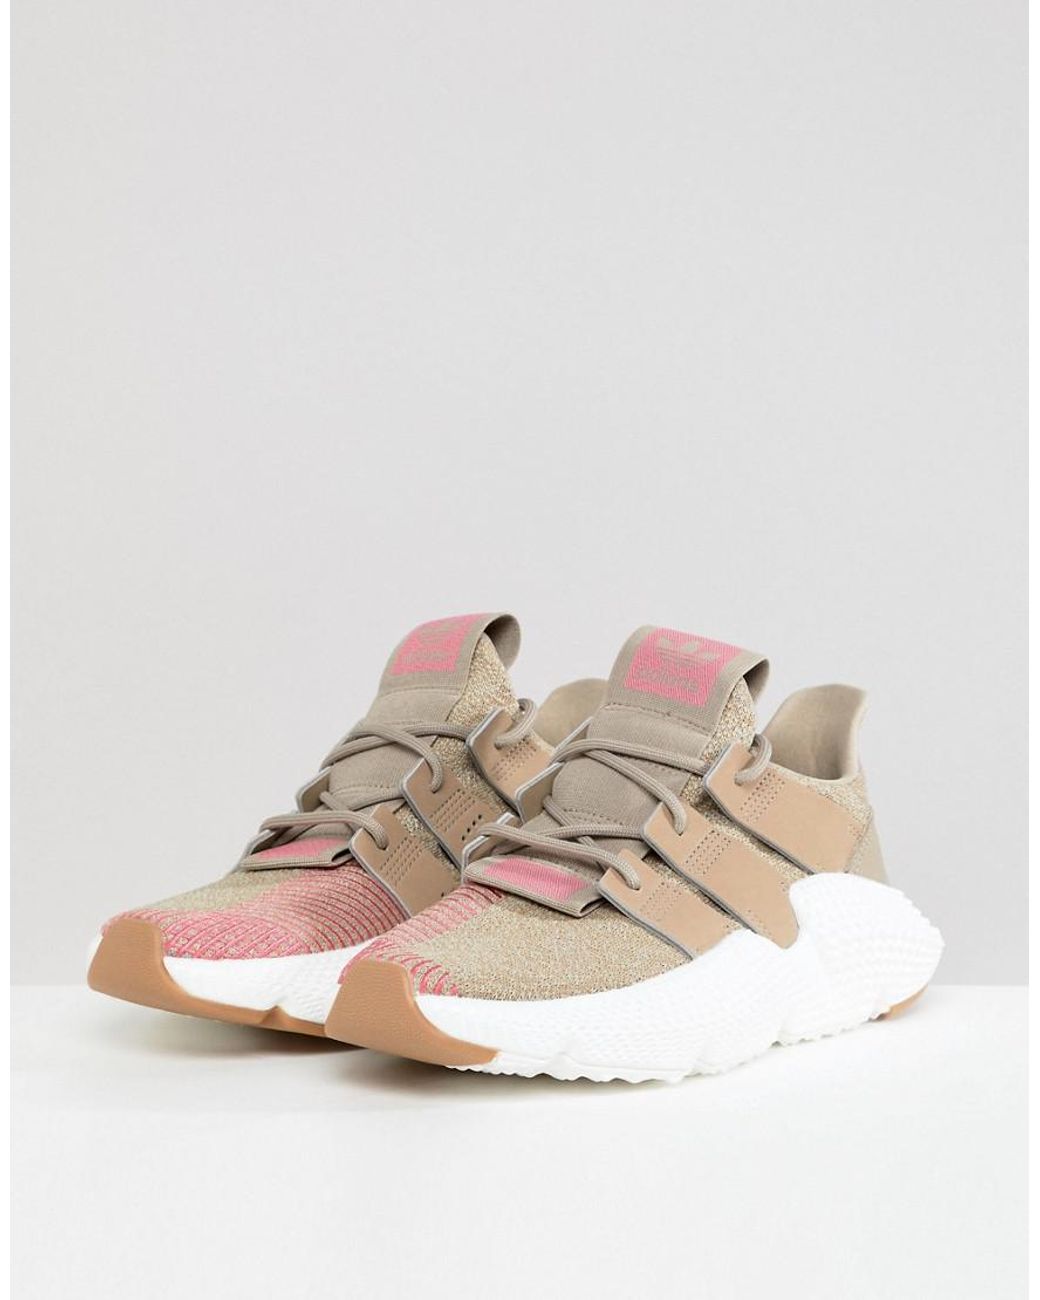 adidas Originals Leather Prophere Trainers In Beige And Pink in Natural |  Lyst